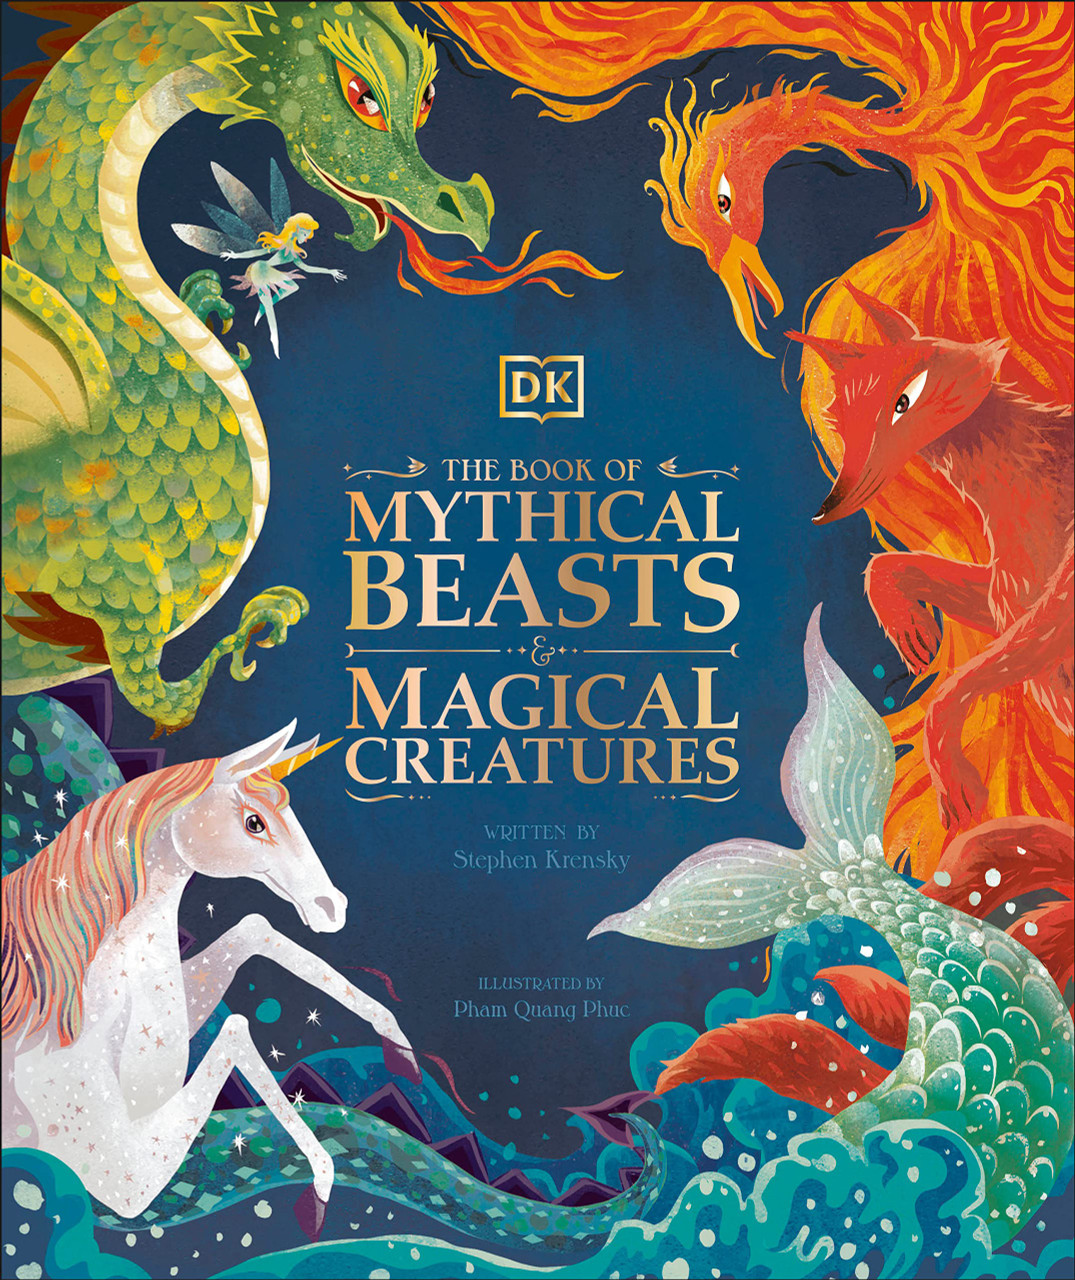 BOOK OF MYTHICAL BEASTS & MAGICAL CREATURES HB